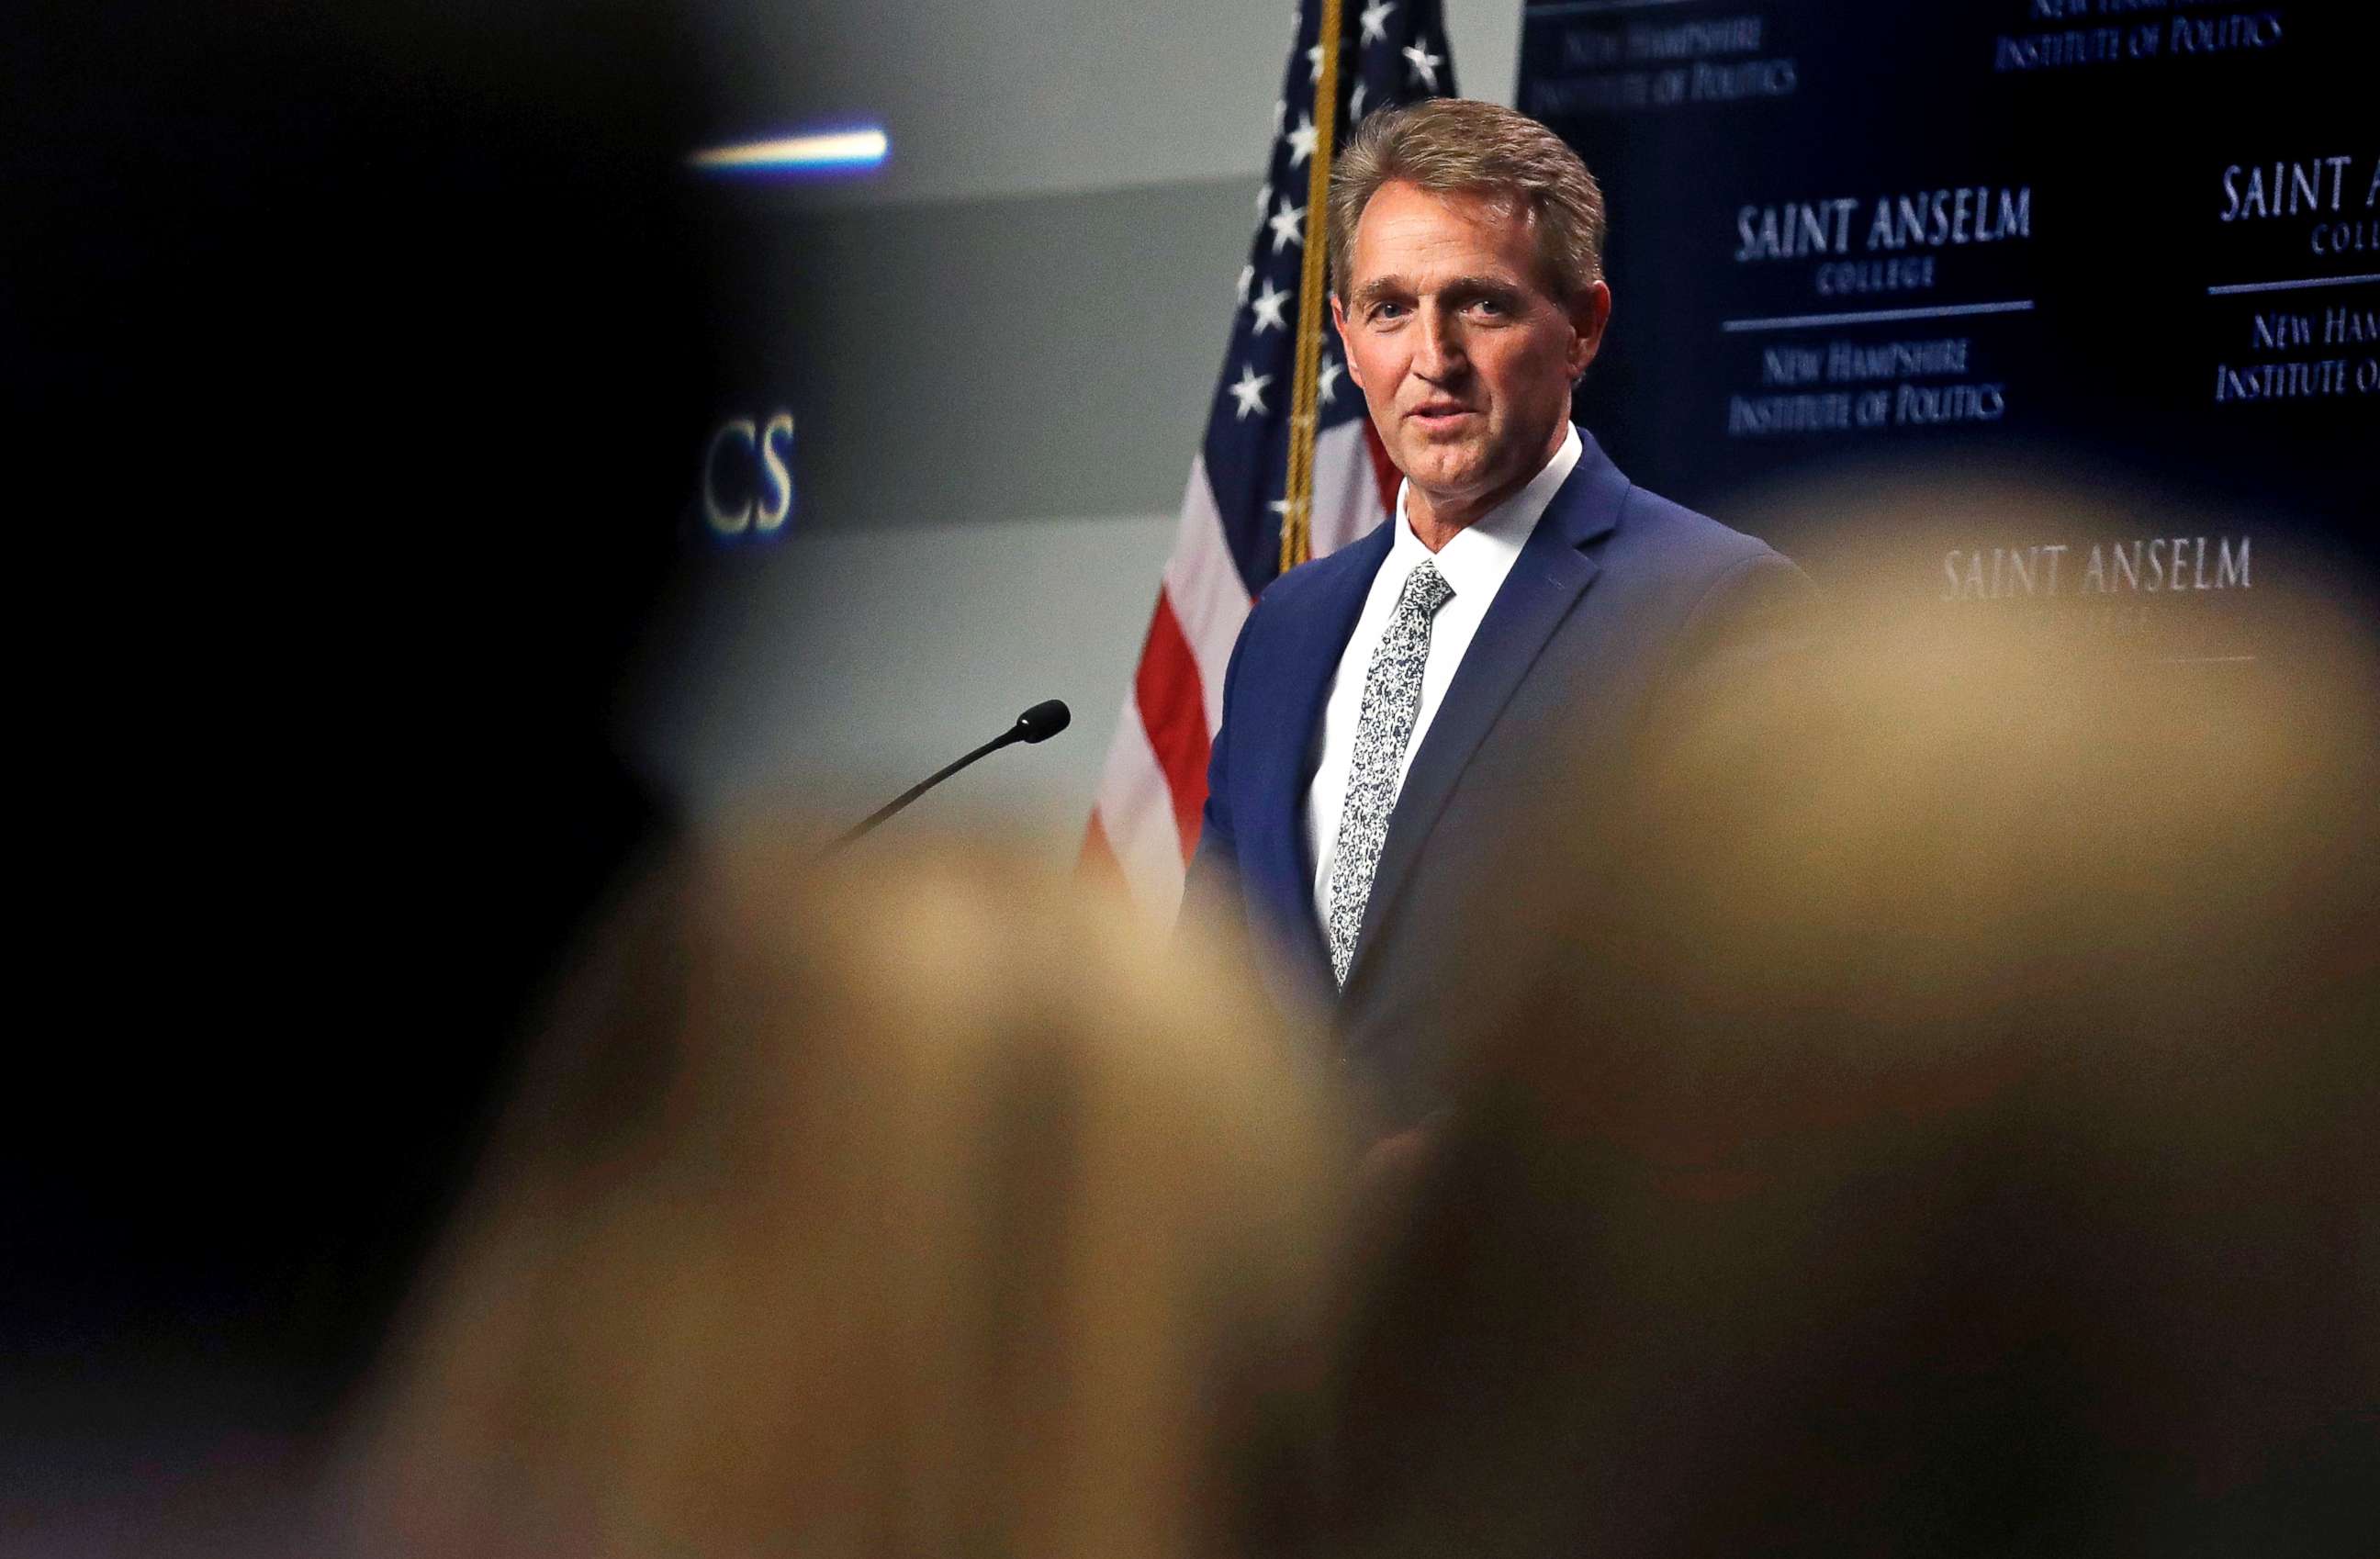 PHOTO: Sen. Jeff Flake addresses a gathering in Manchester, N.H., Oct. 1, 2018.